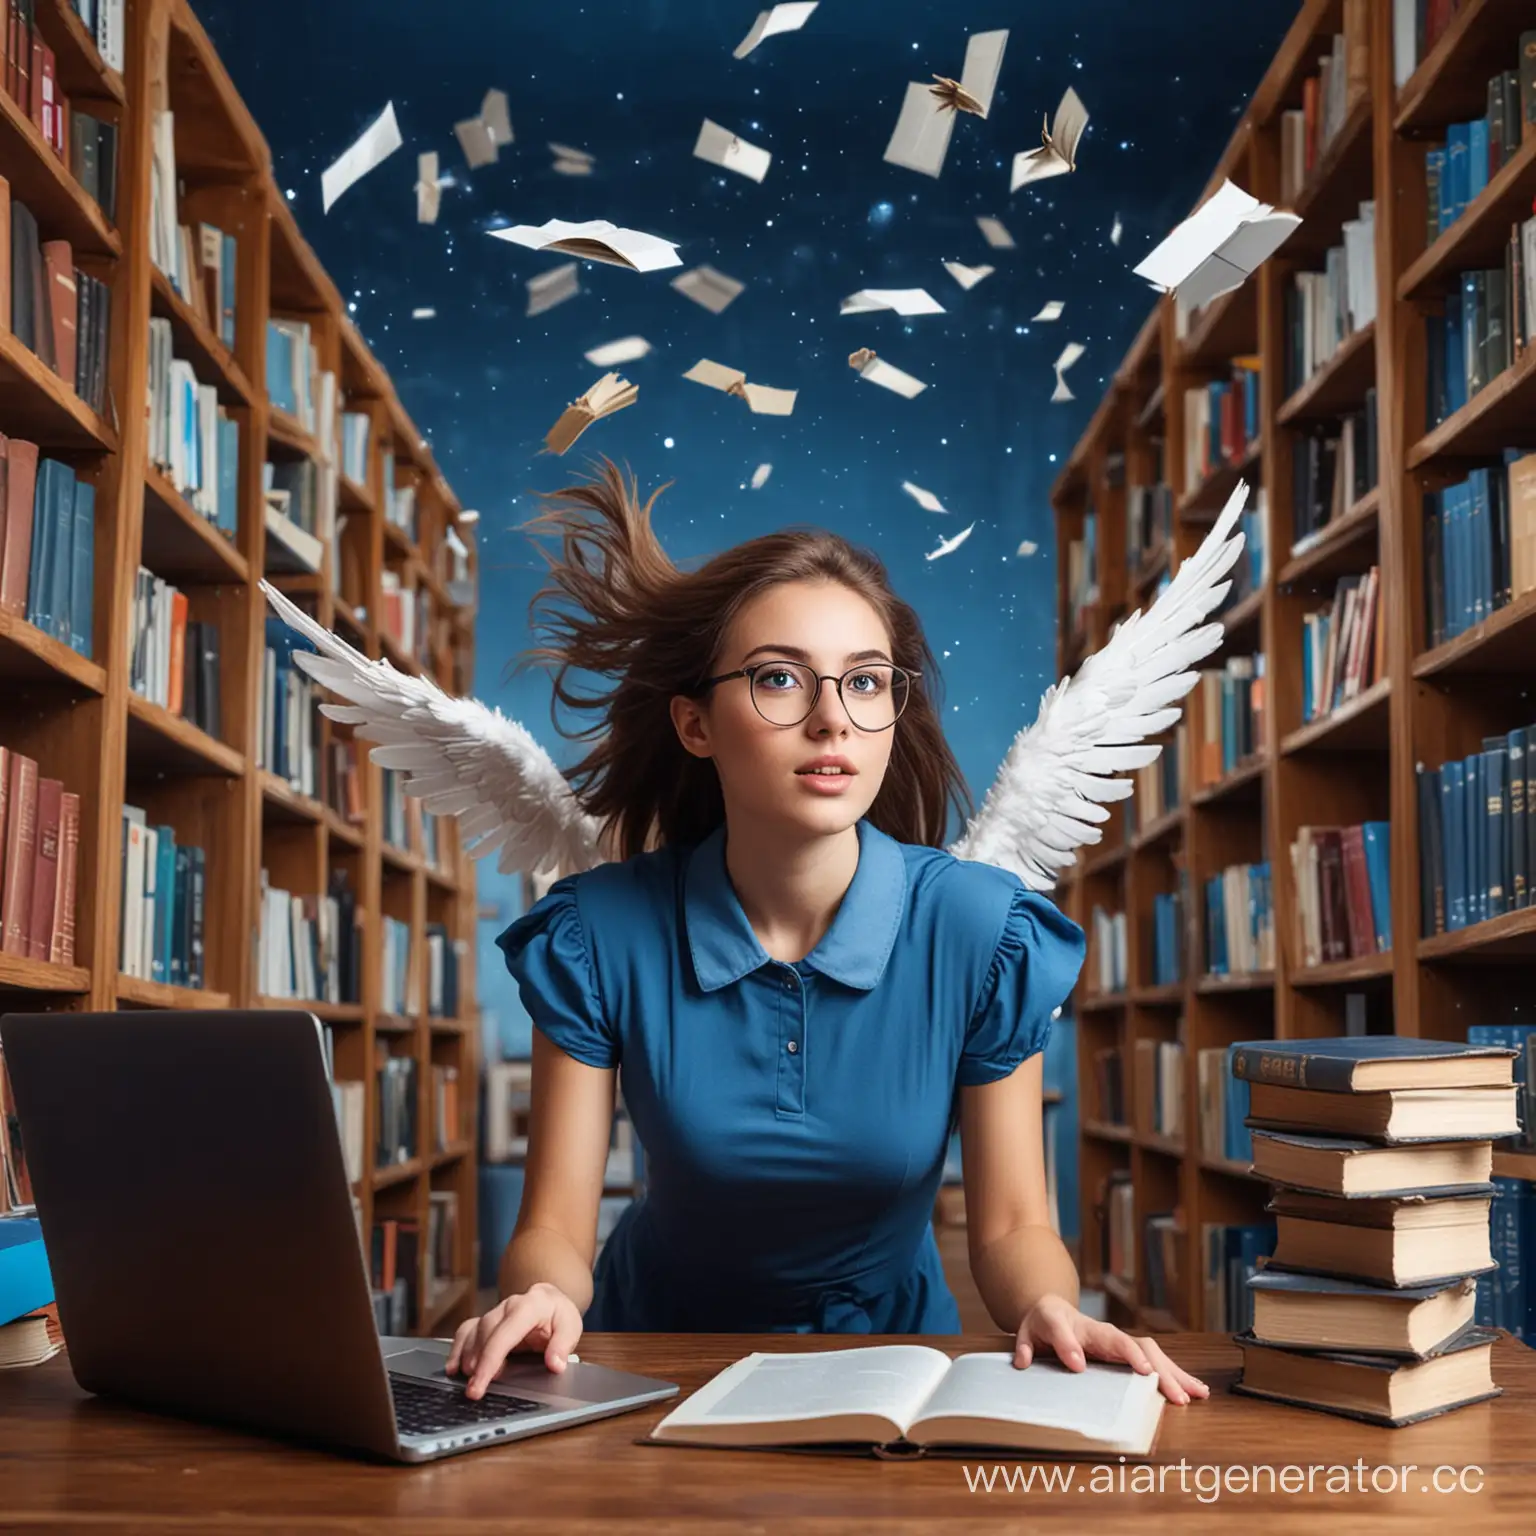 Enchanting-Girl-Surrounded-by-Flying-Books-in-a-Library-with-a-Blue-Screen-Laptop